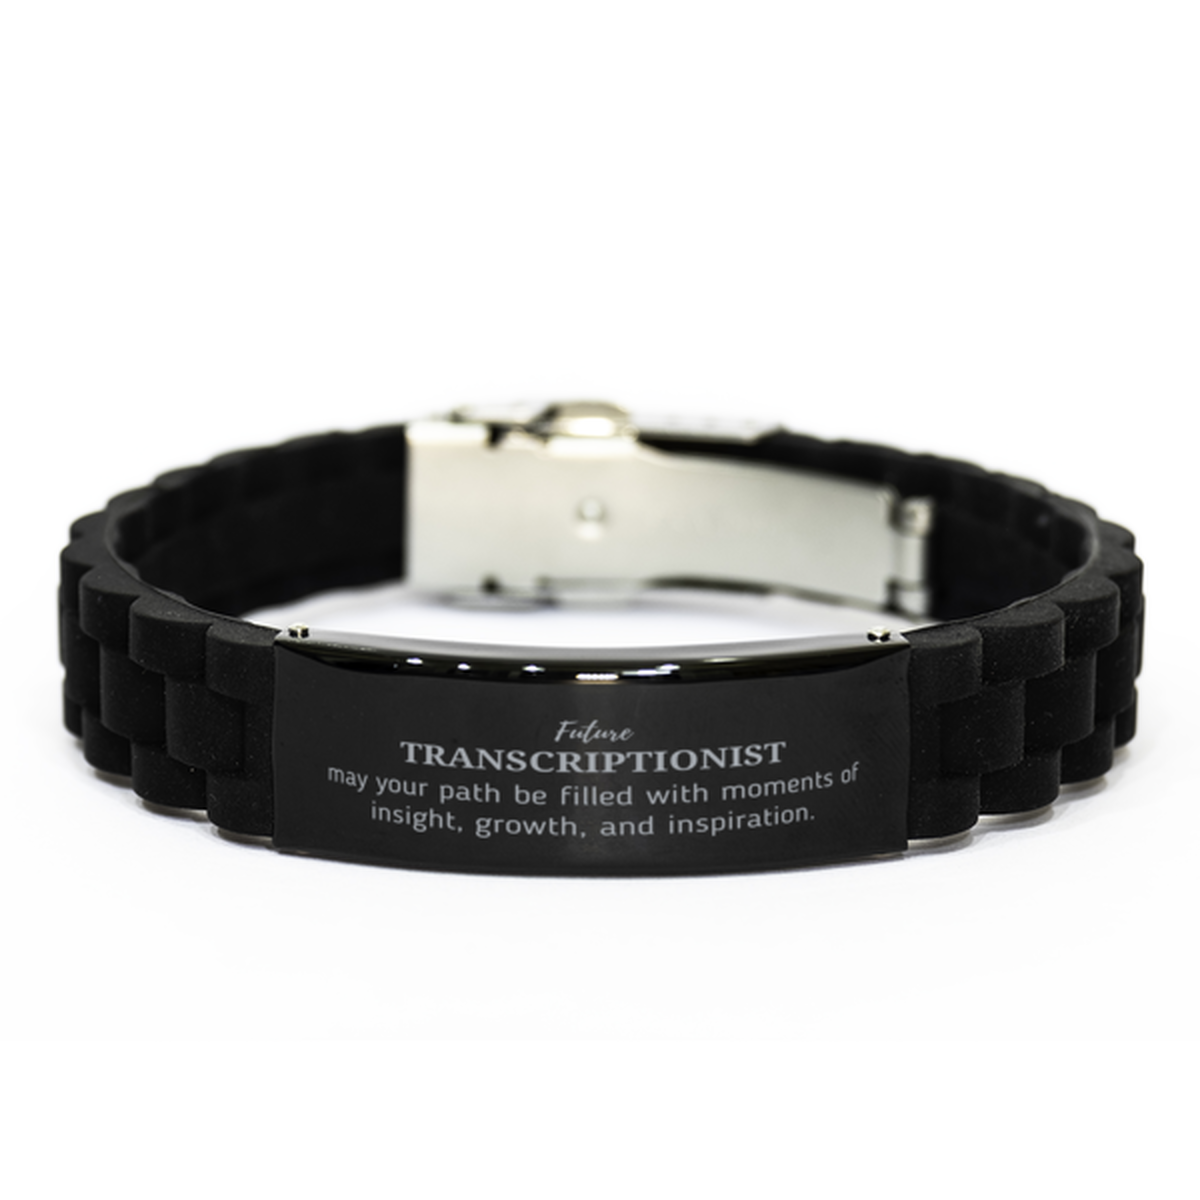 Future Transcriptionist Gifts, May your path be filled with moments of insight, Graduation Gifts for New Transcriptionist, Christmas Unique Black Glidelock Clasp Bracelet For Men, Women, Friends